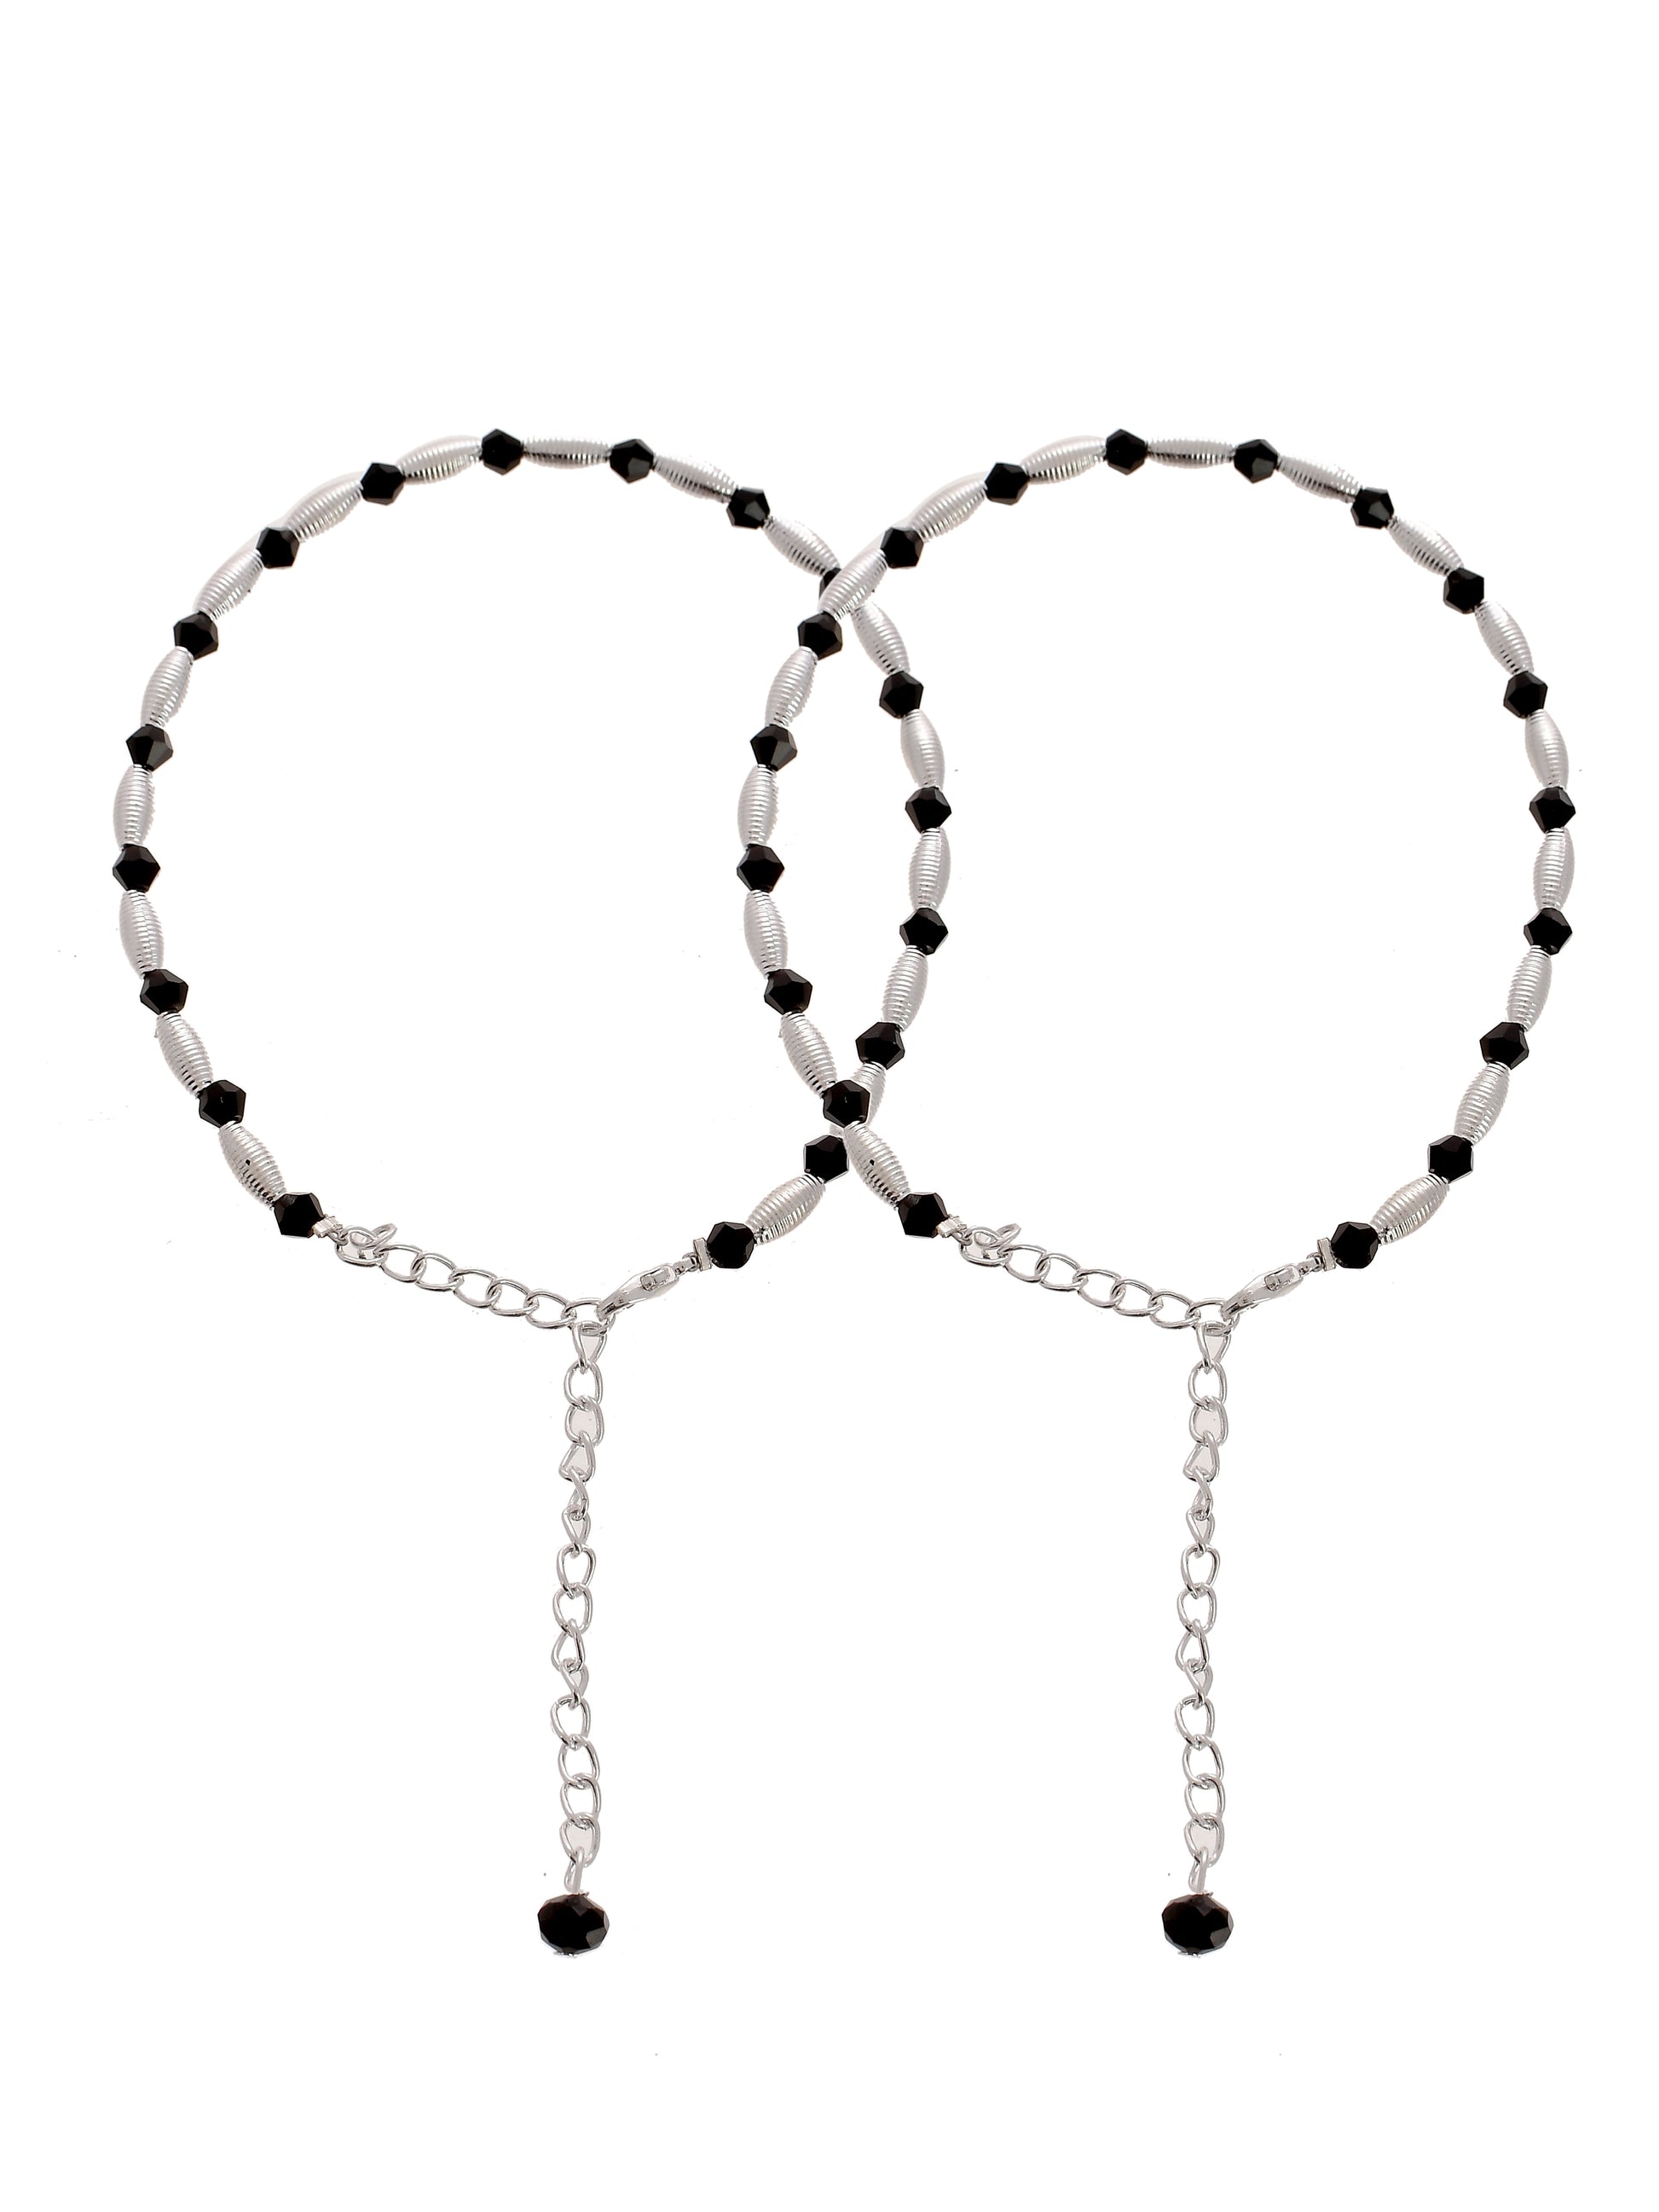 Silver Plated Black Beads Anklet